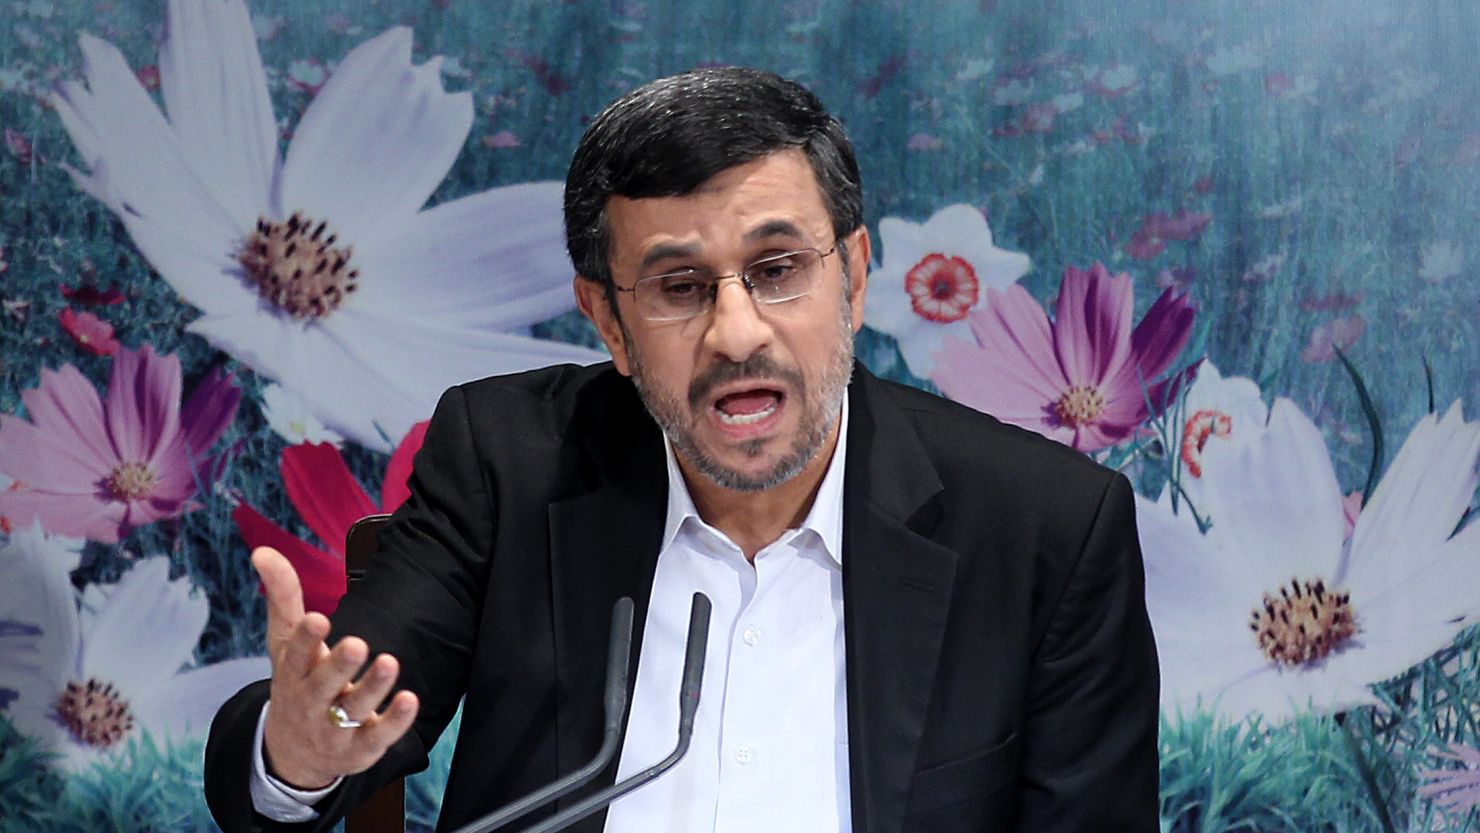 With elections in June, it remains unclear how energy policy will evolve after President Mahmoud Ahmadinejad's era